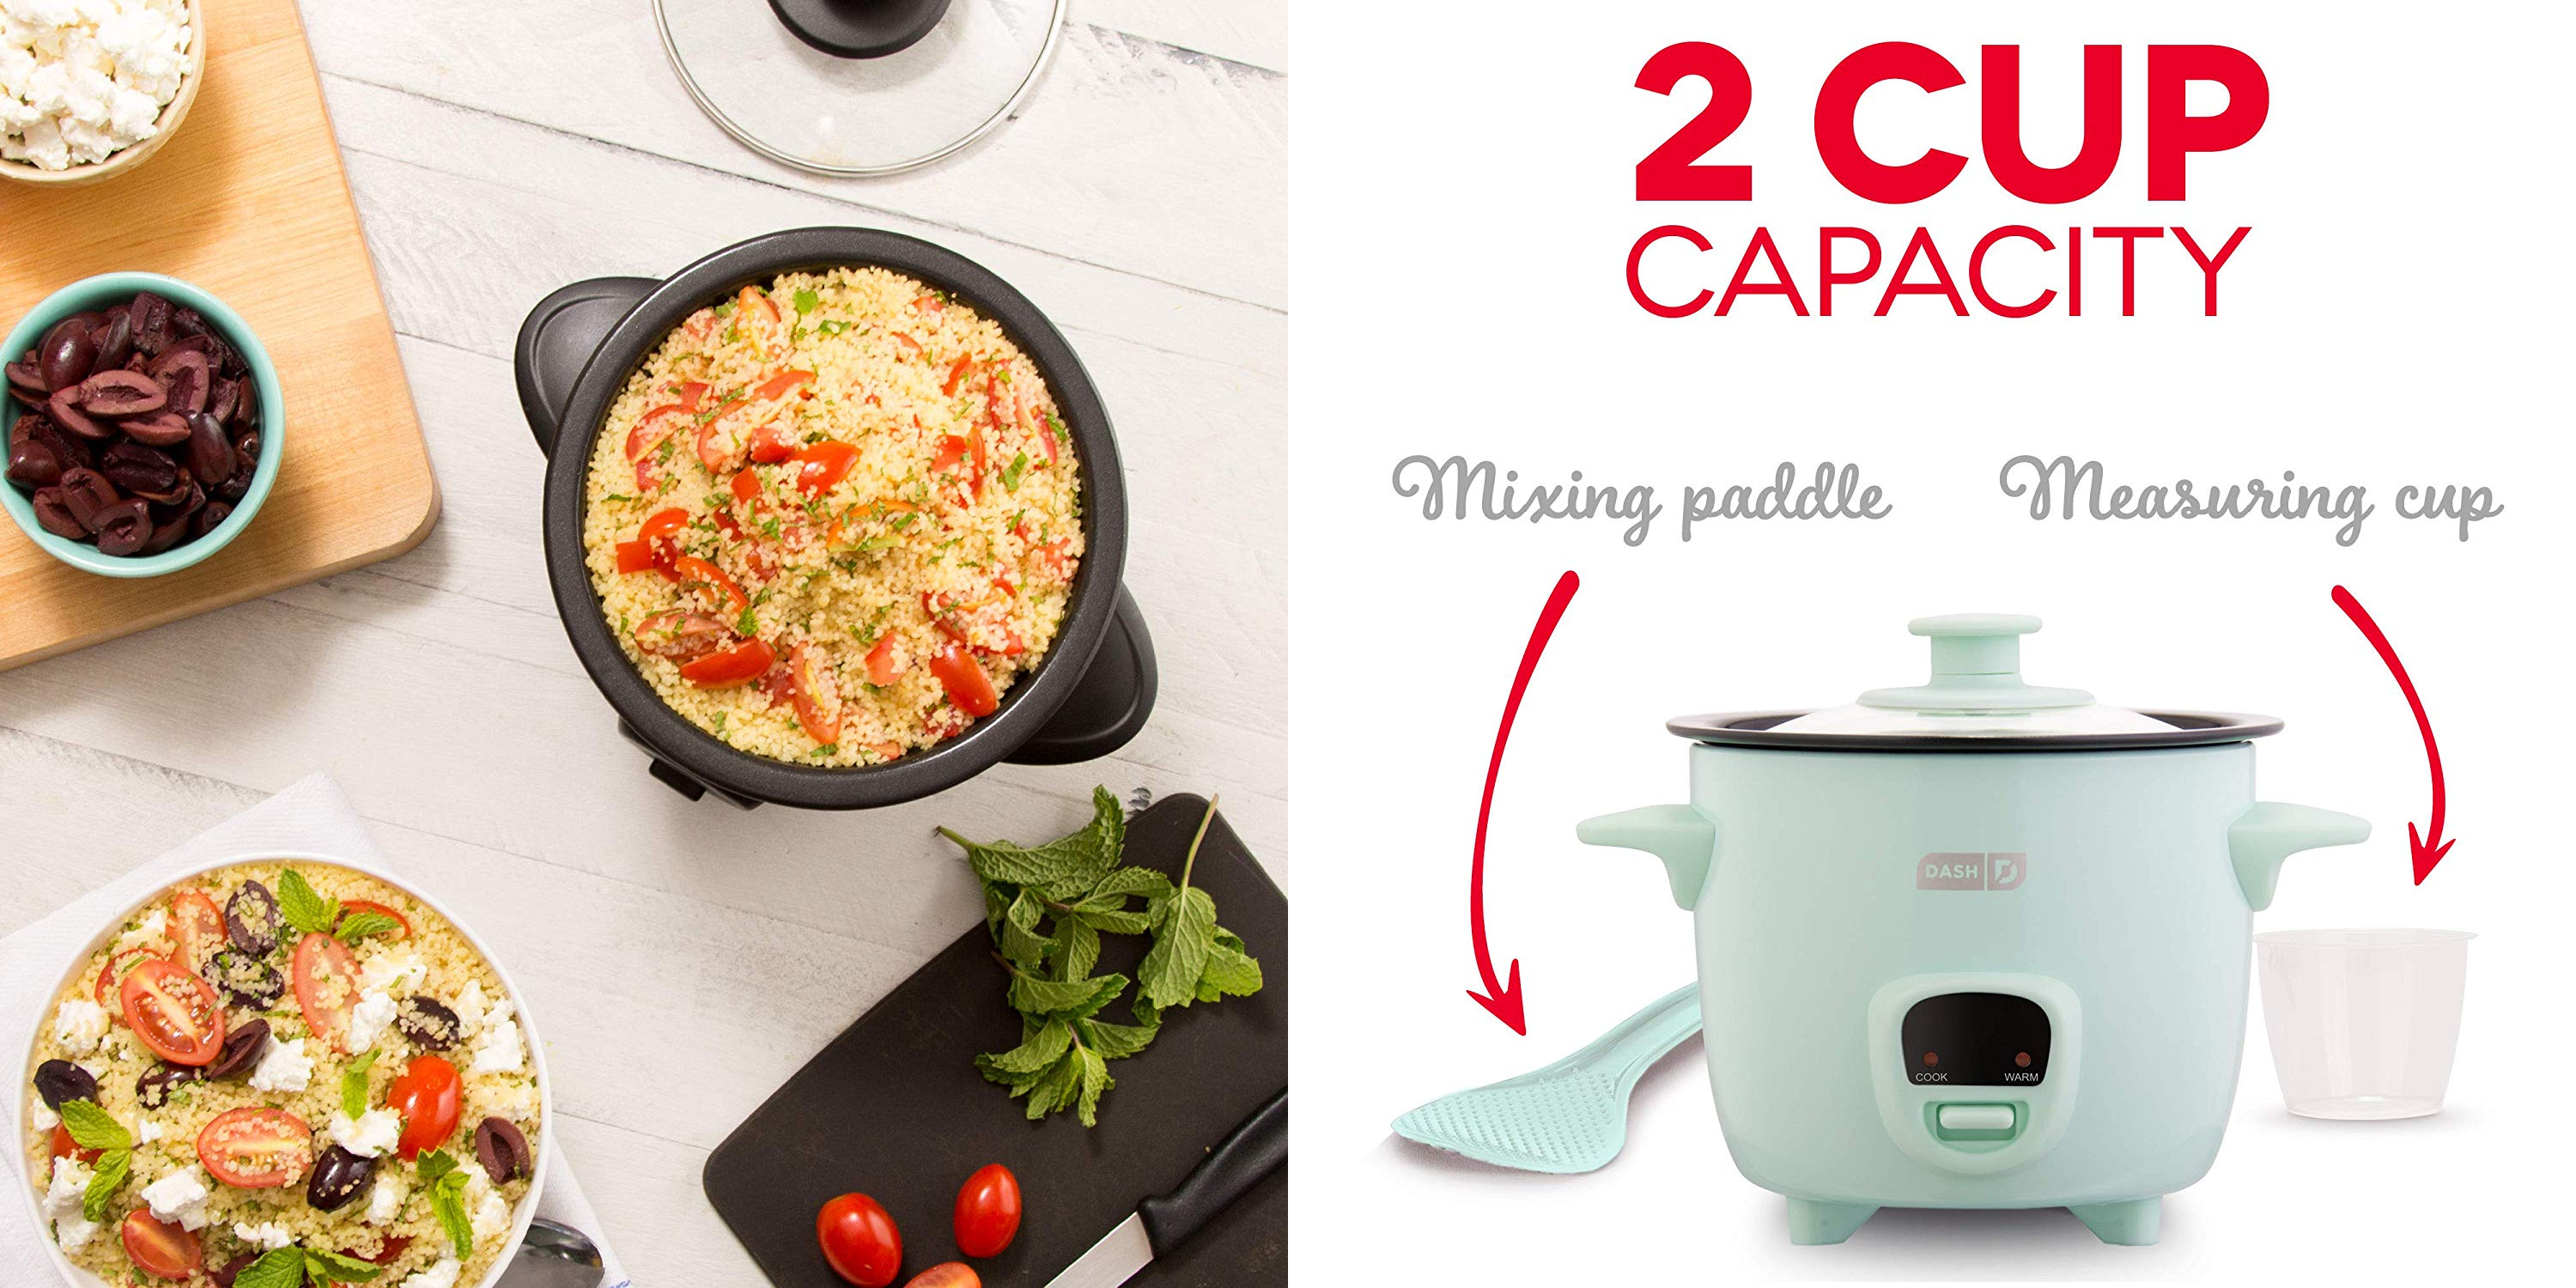 The Dash Mini Rice Cooker has a retro appeal & a low price of $17 (Reg.  $25+)